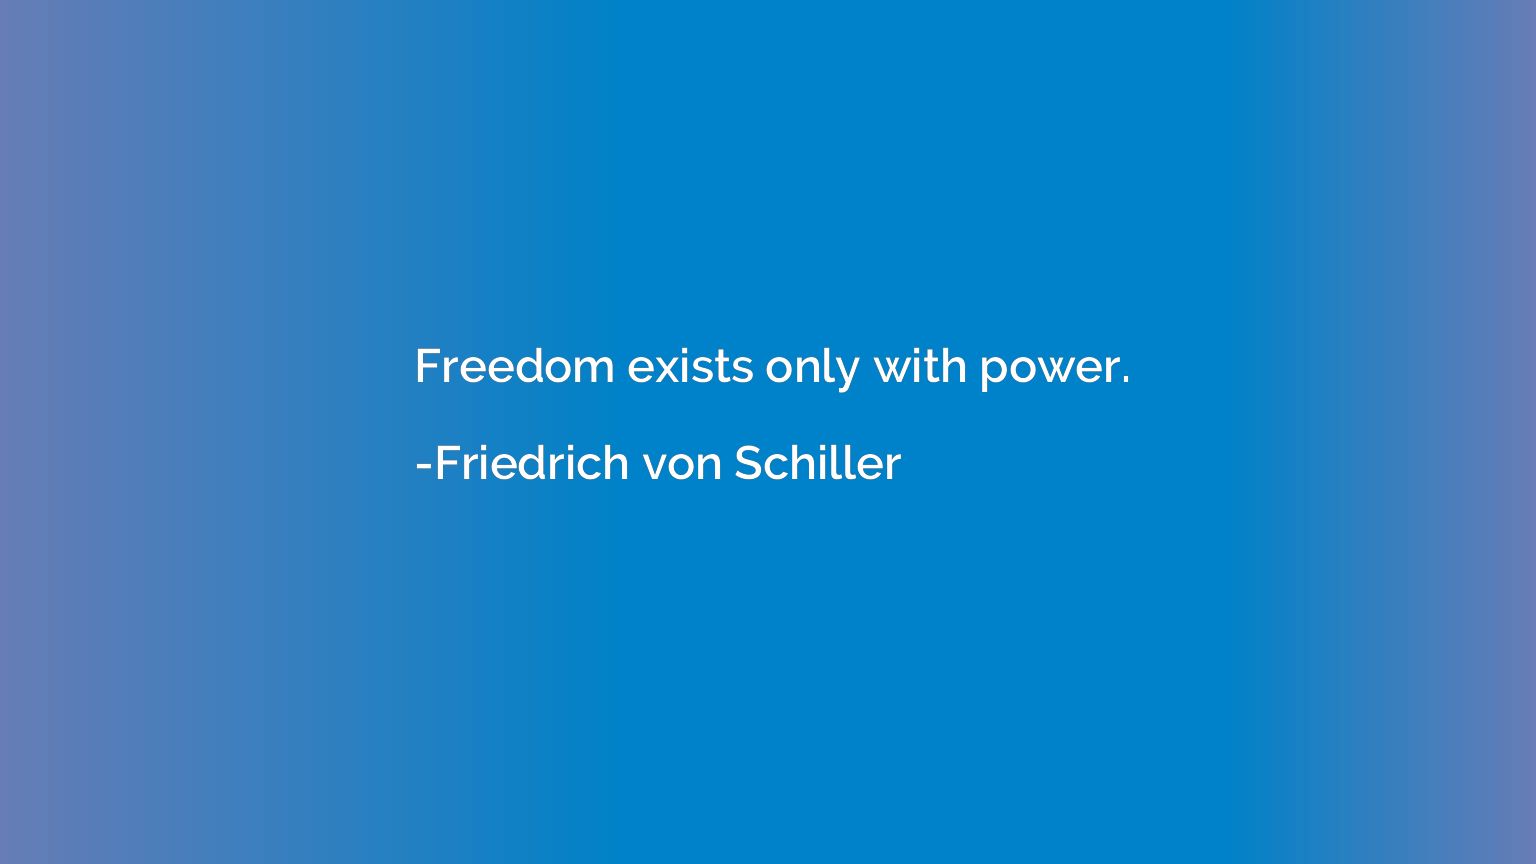 Freedom exists only with power.